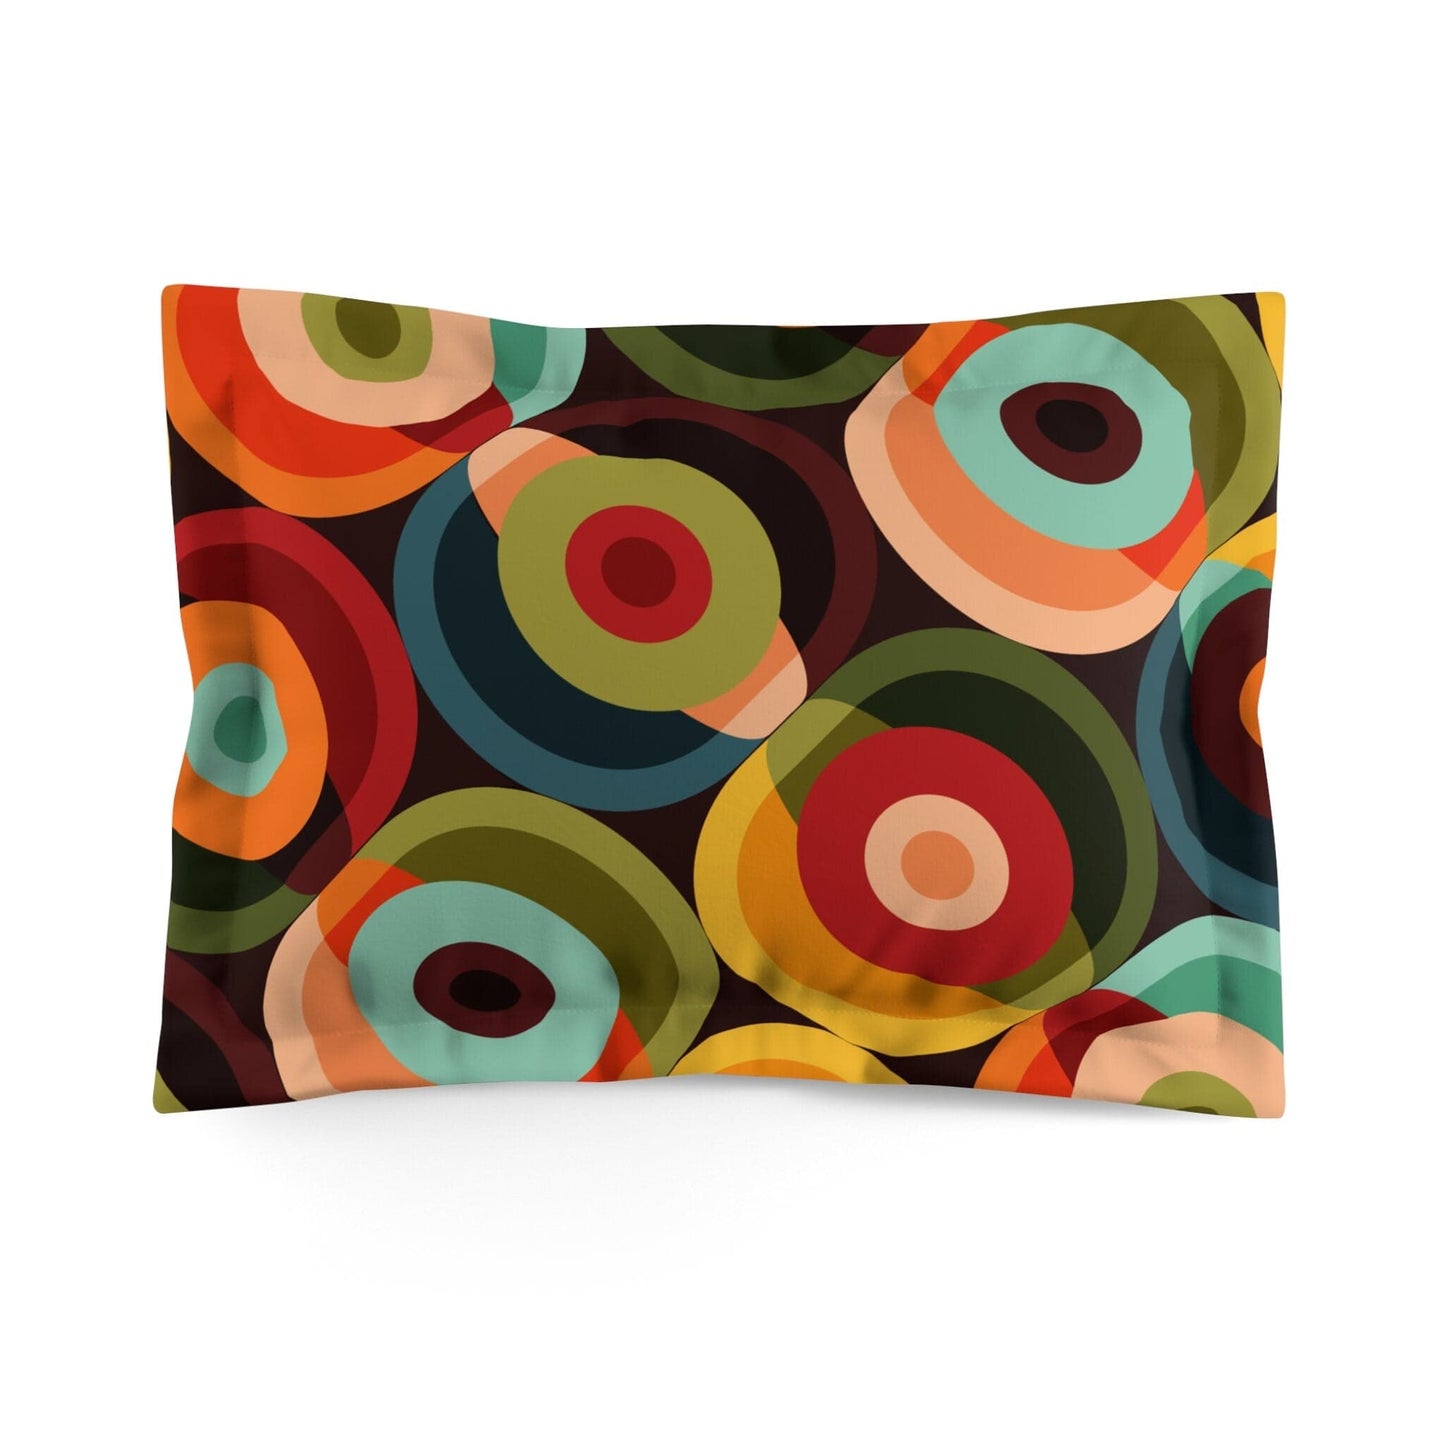 Kate McEnroe New York Retro Groovy Geometric Circle Orbs Pillow Sham, 70s Mid Century Modern Psychedelic Abstract Bedroom Pillow Cover - 132682823 Pillow Shams